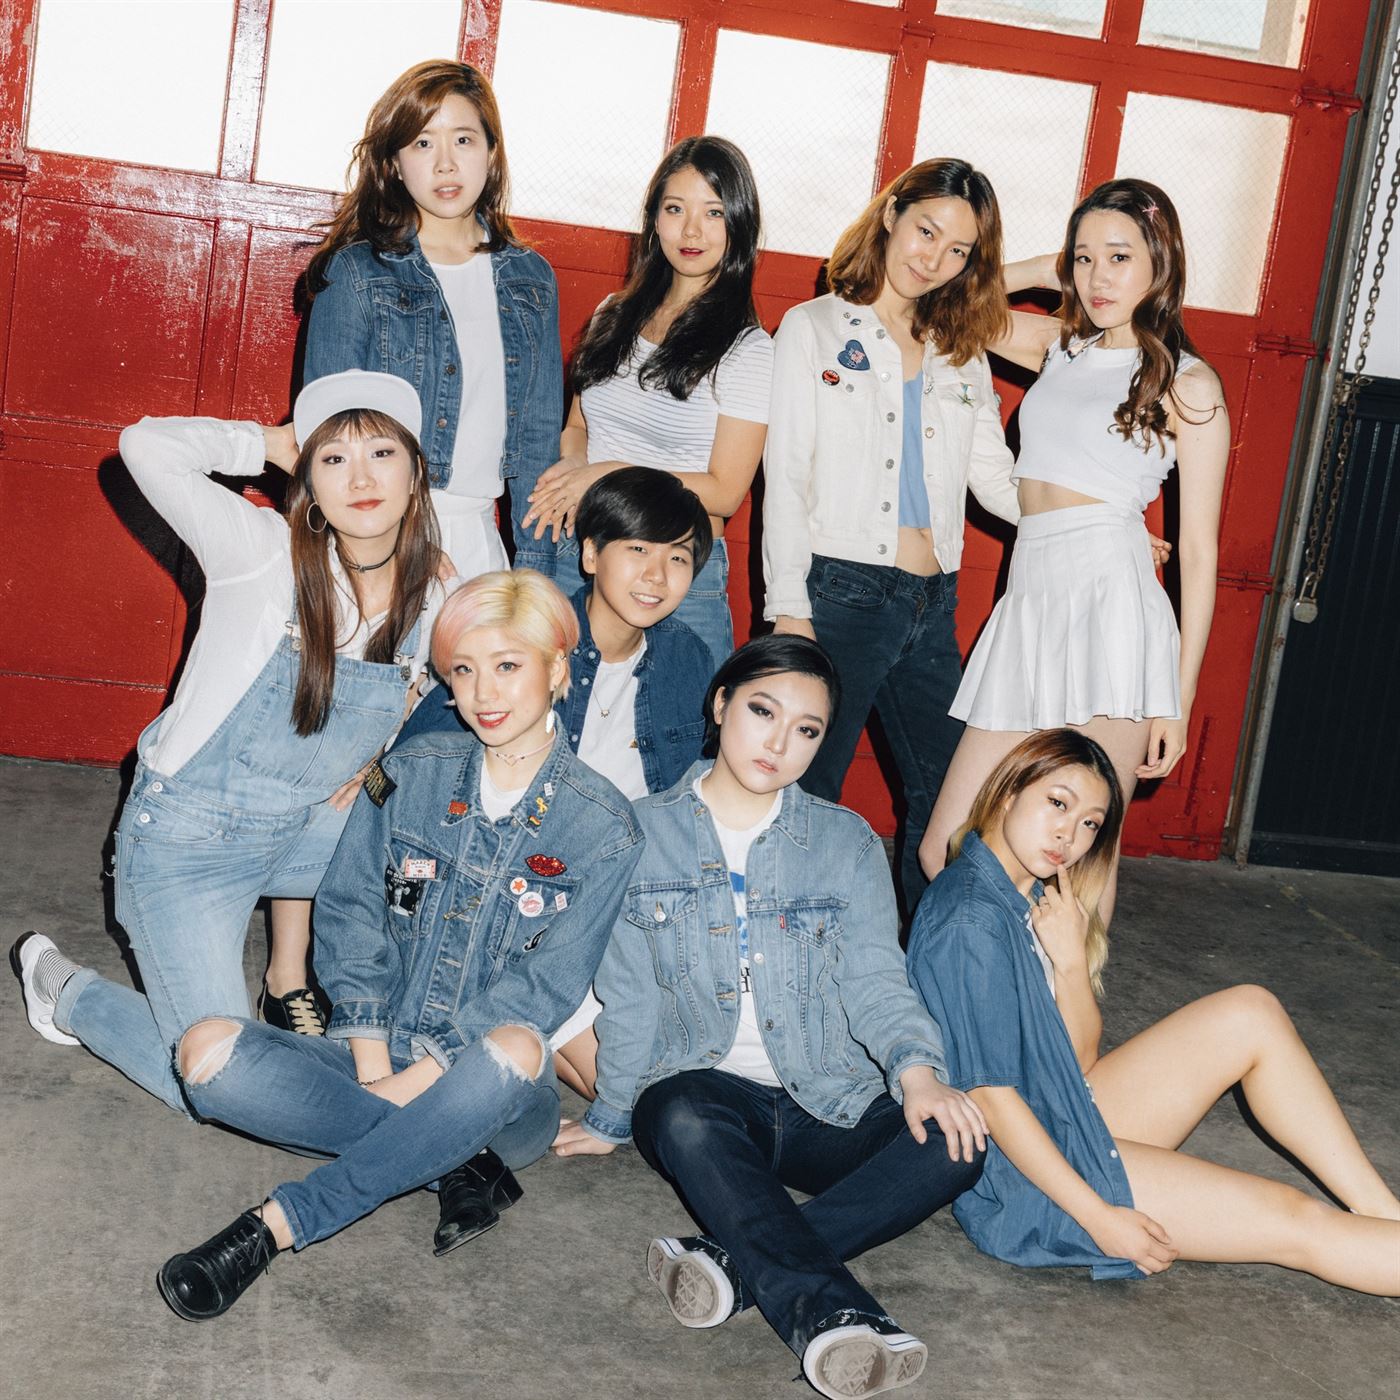 Nine Korean girls with different interests and backgrounds form a K-pop cover dance group in Choi&squot;s "Seventeen Girlfriends." Photo courtesy of Jiwon Choi